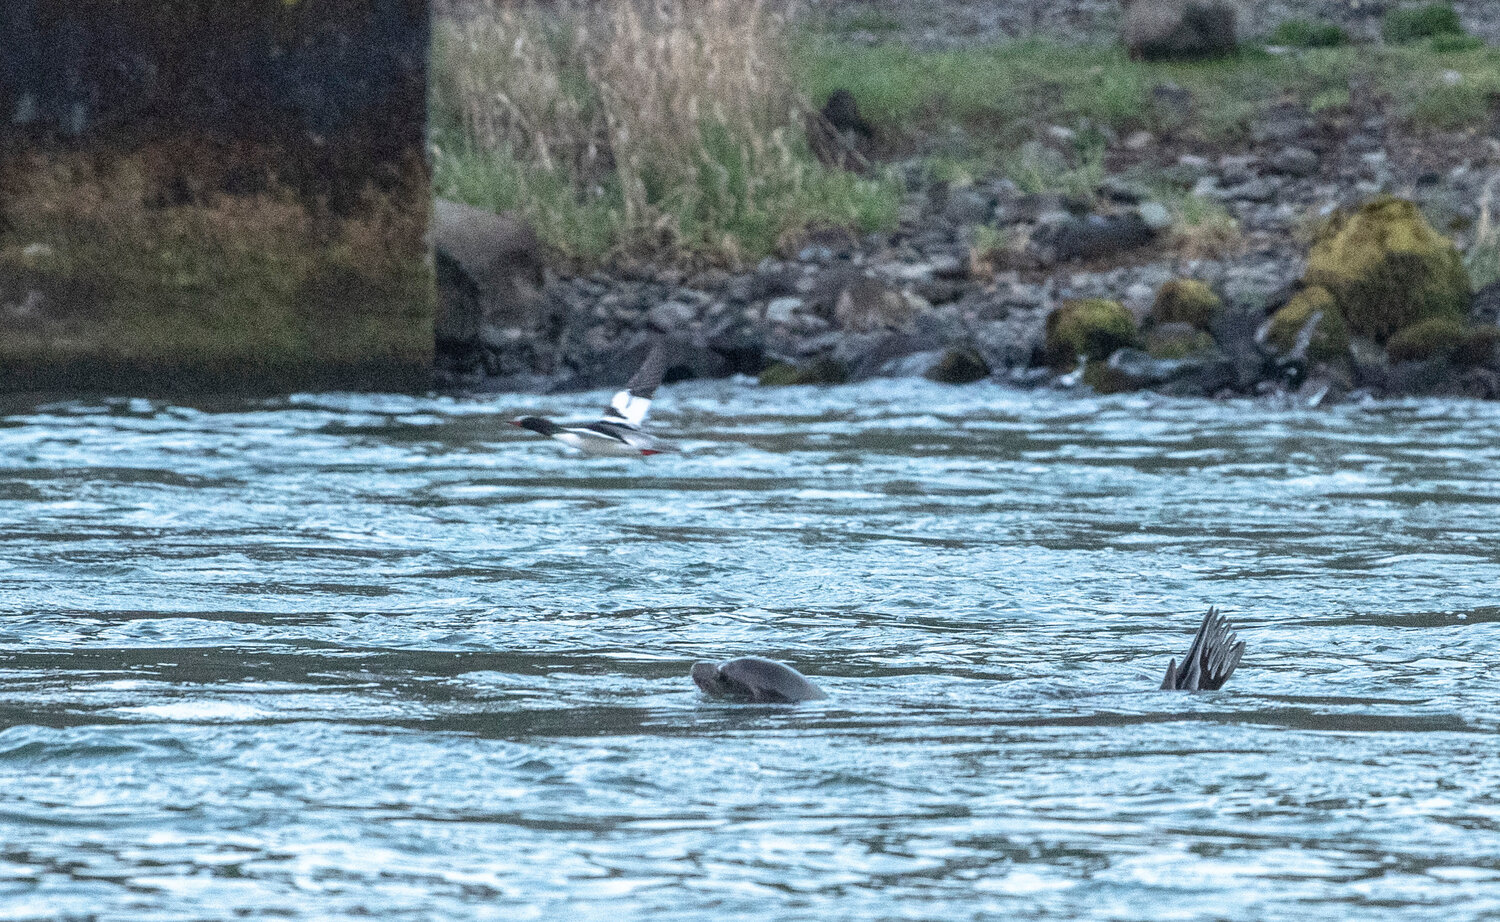 A sea lion watches as a fowl flies past it in Salkum on Monday night.